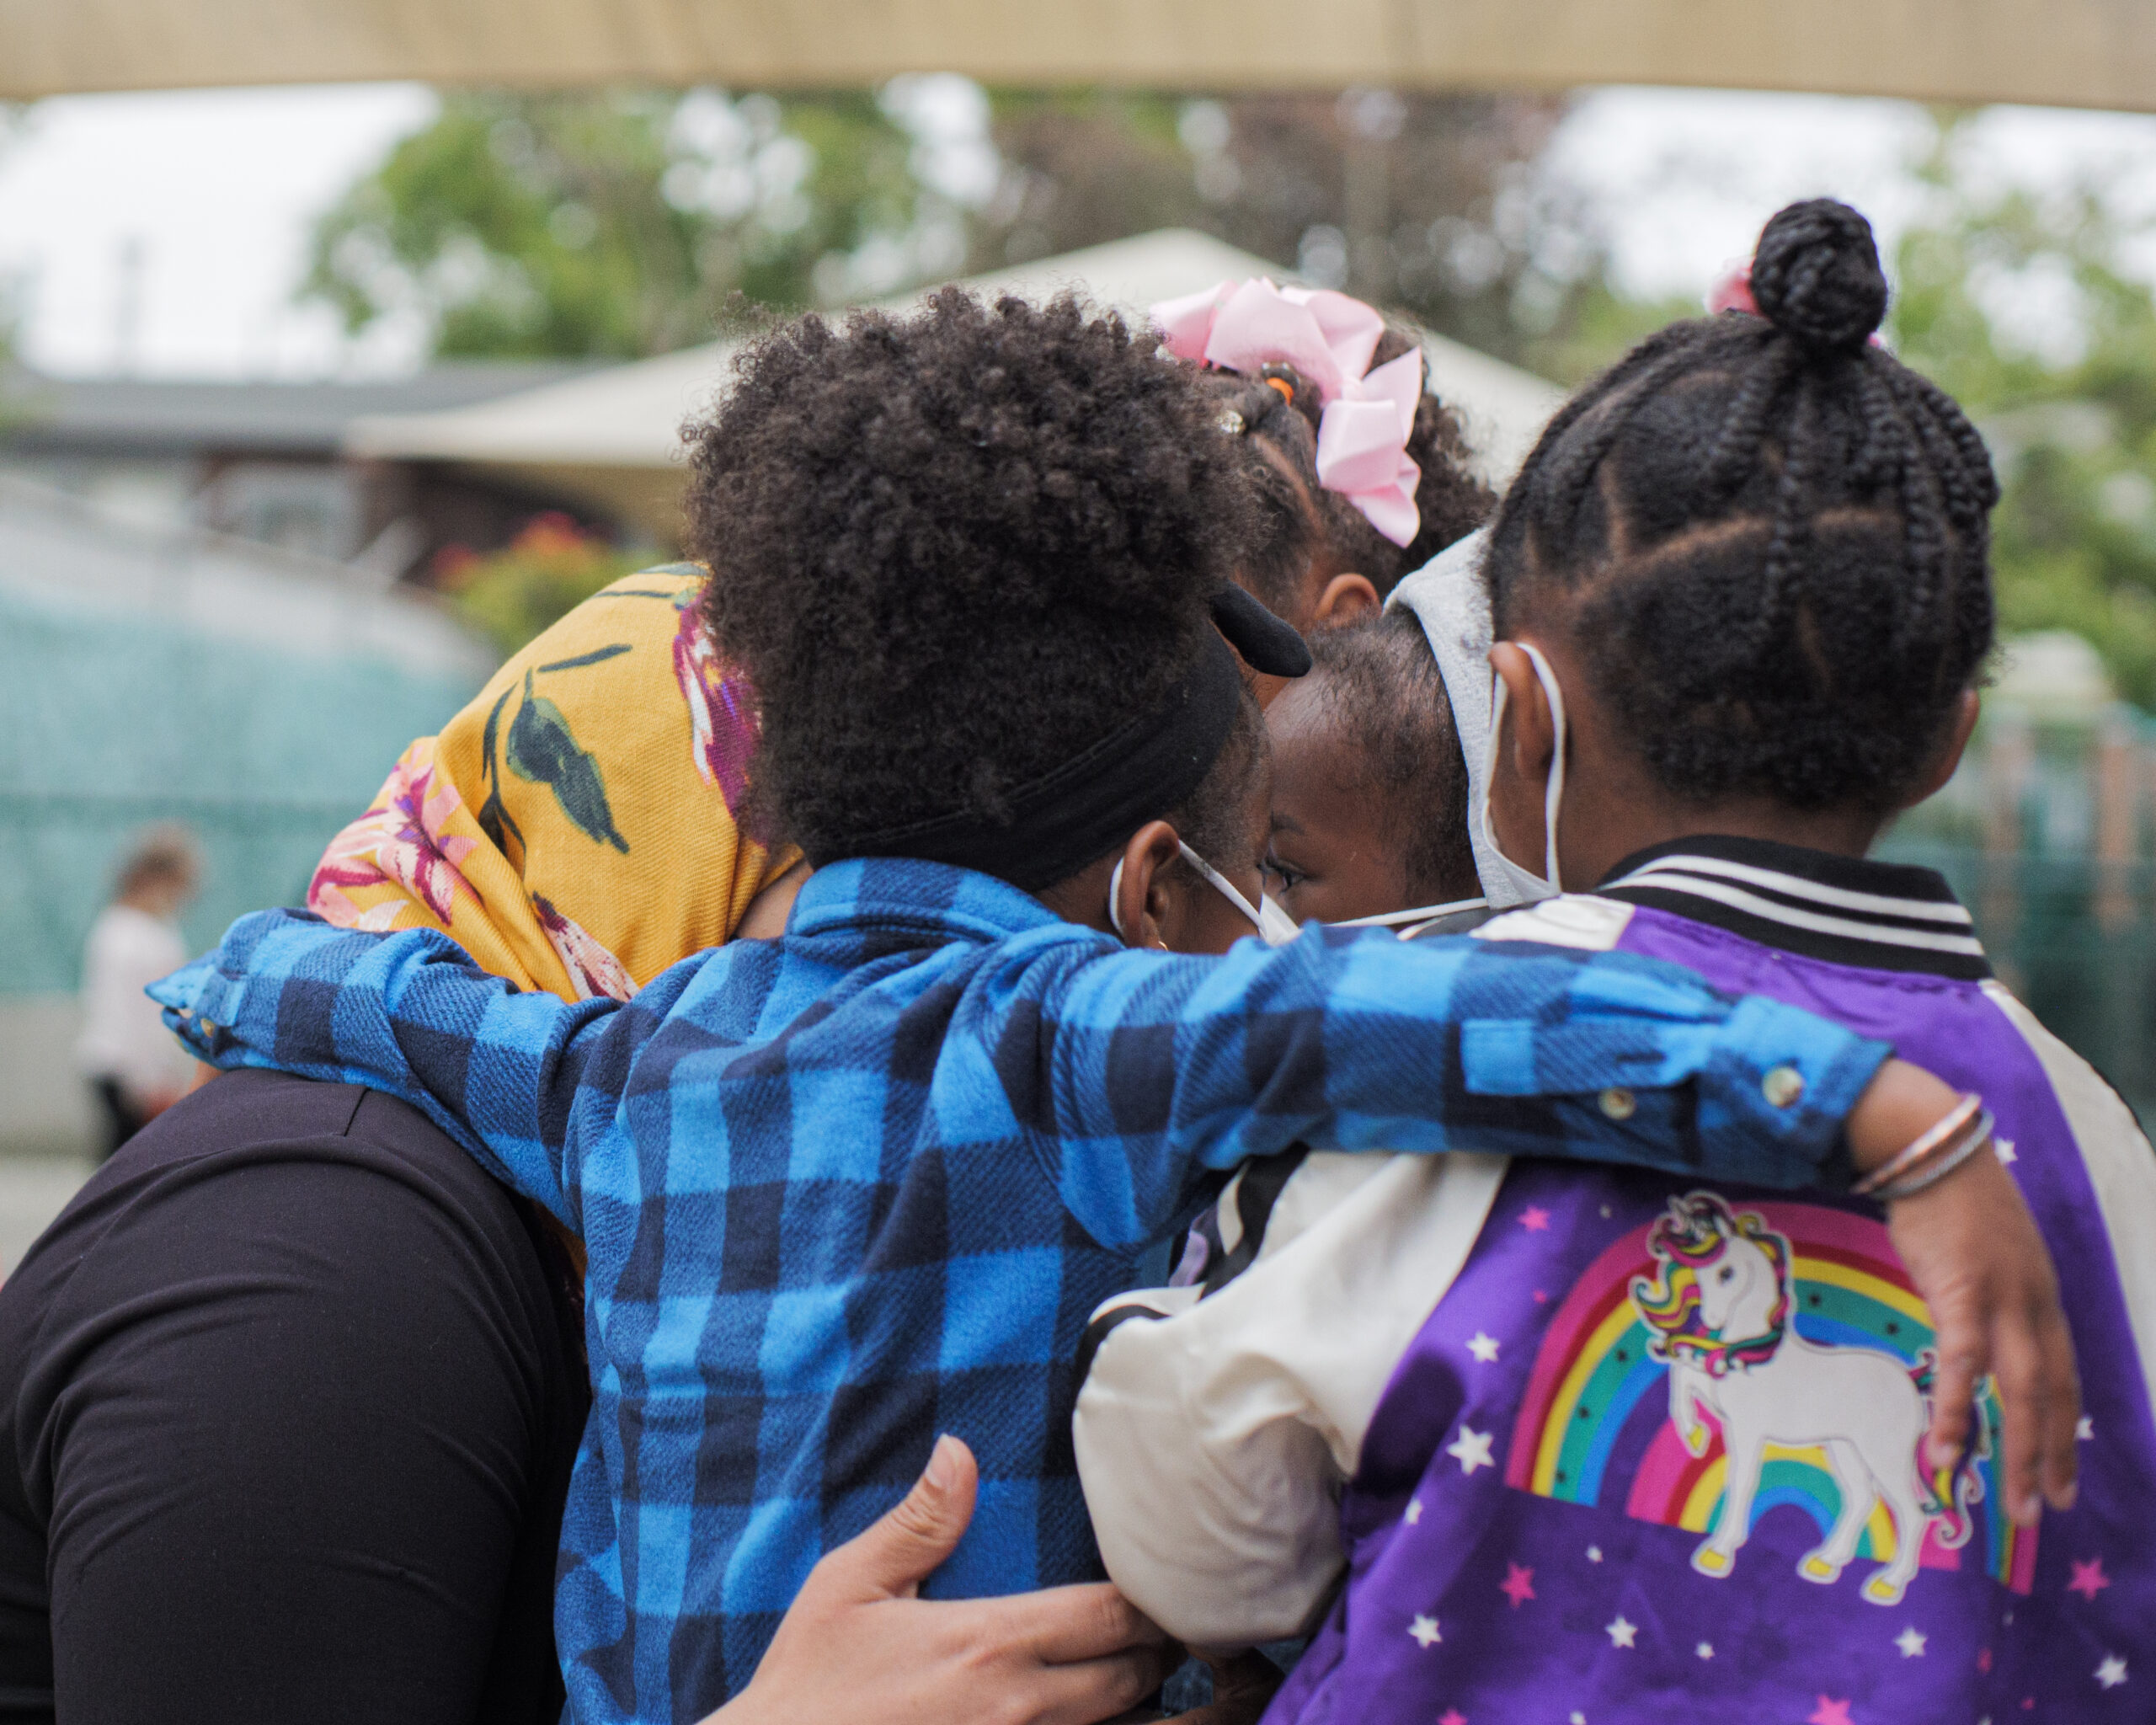 Two African American children huddle together with an adult wearing a head covering